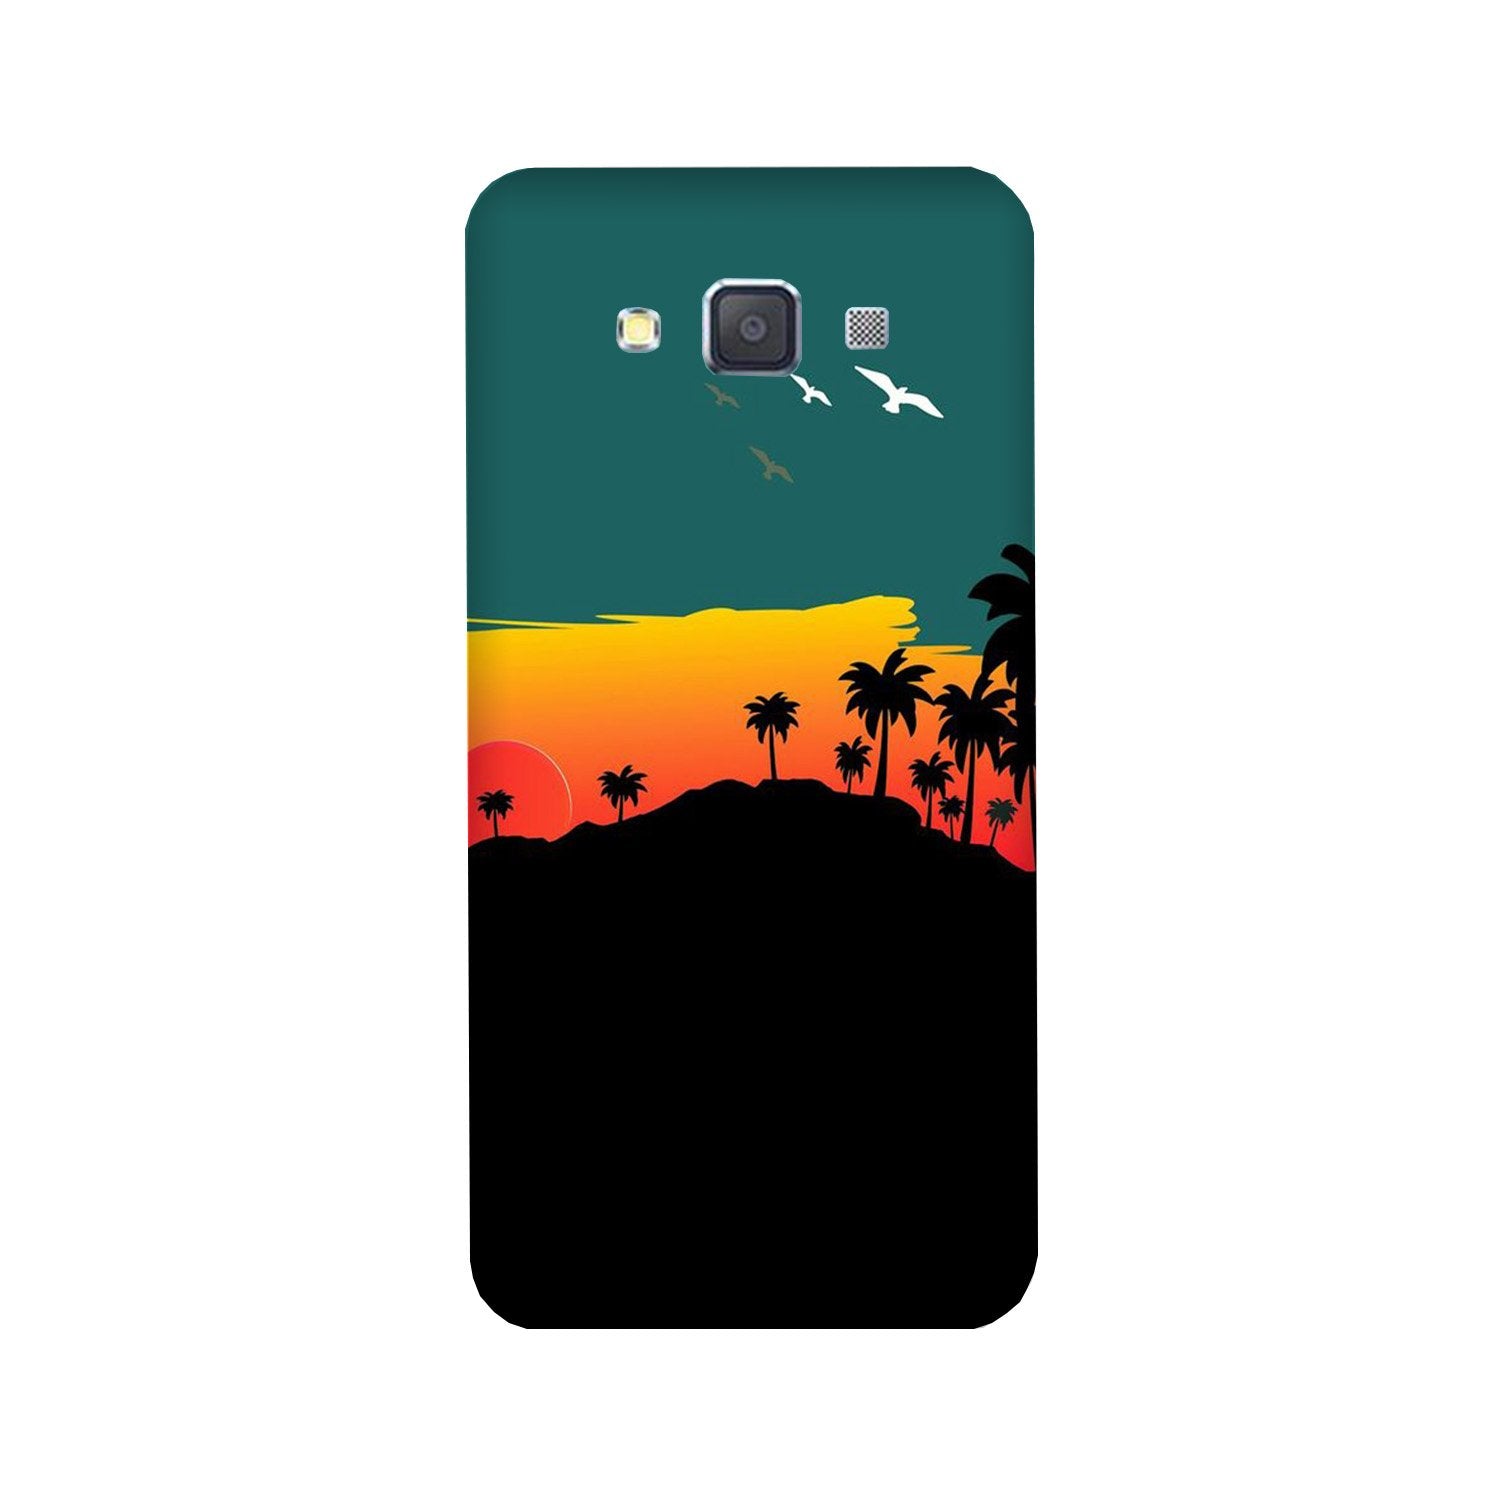 Sky Trees Case for Galaxy Grand 2 (Design - 191)